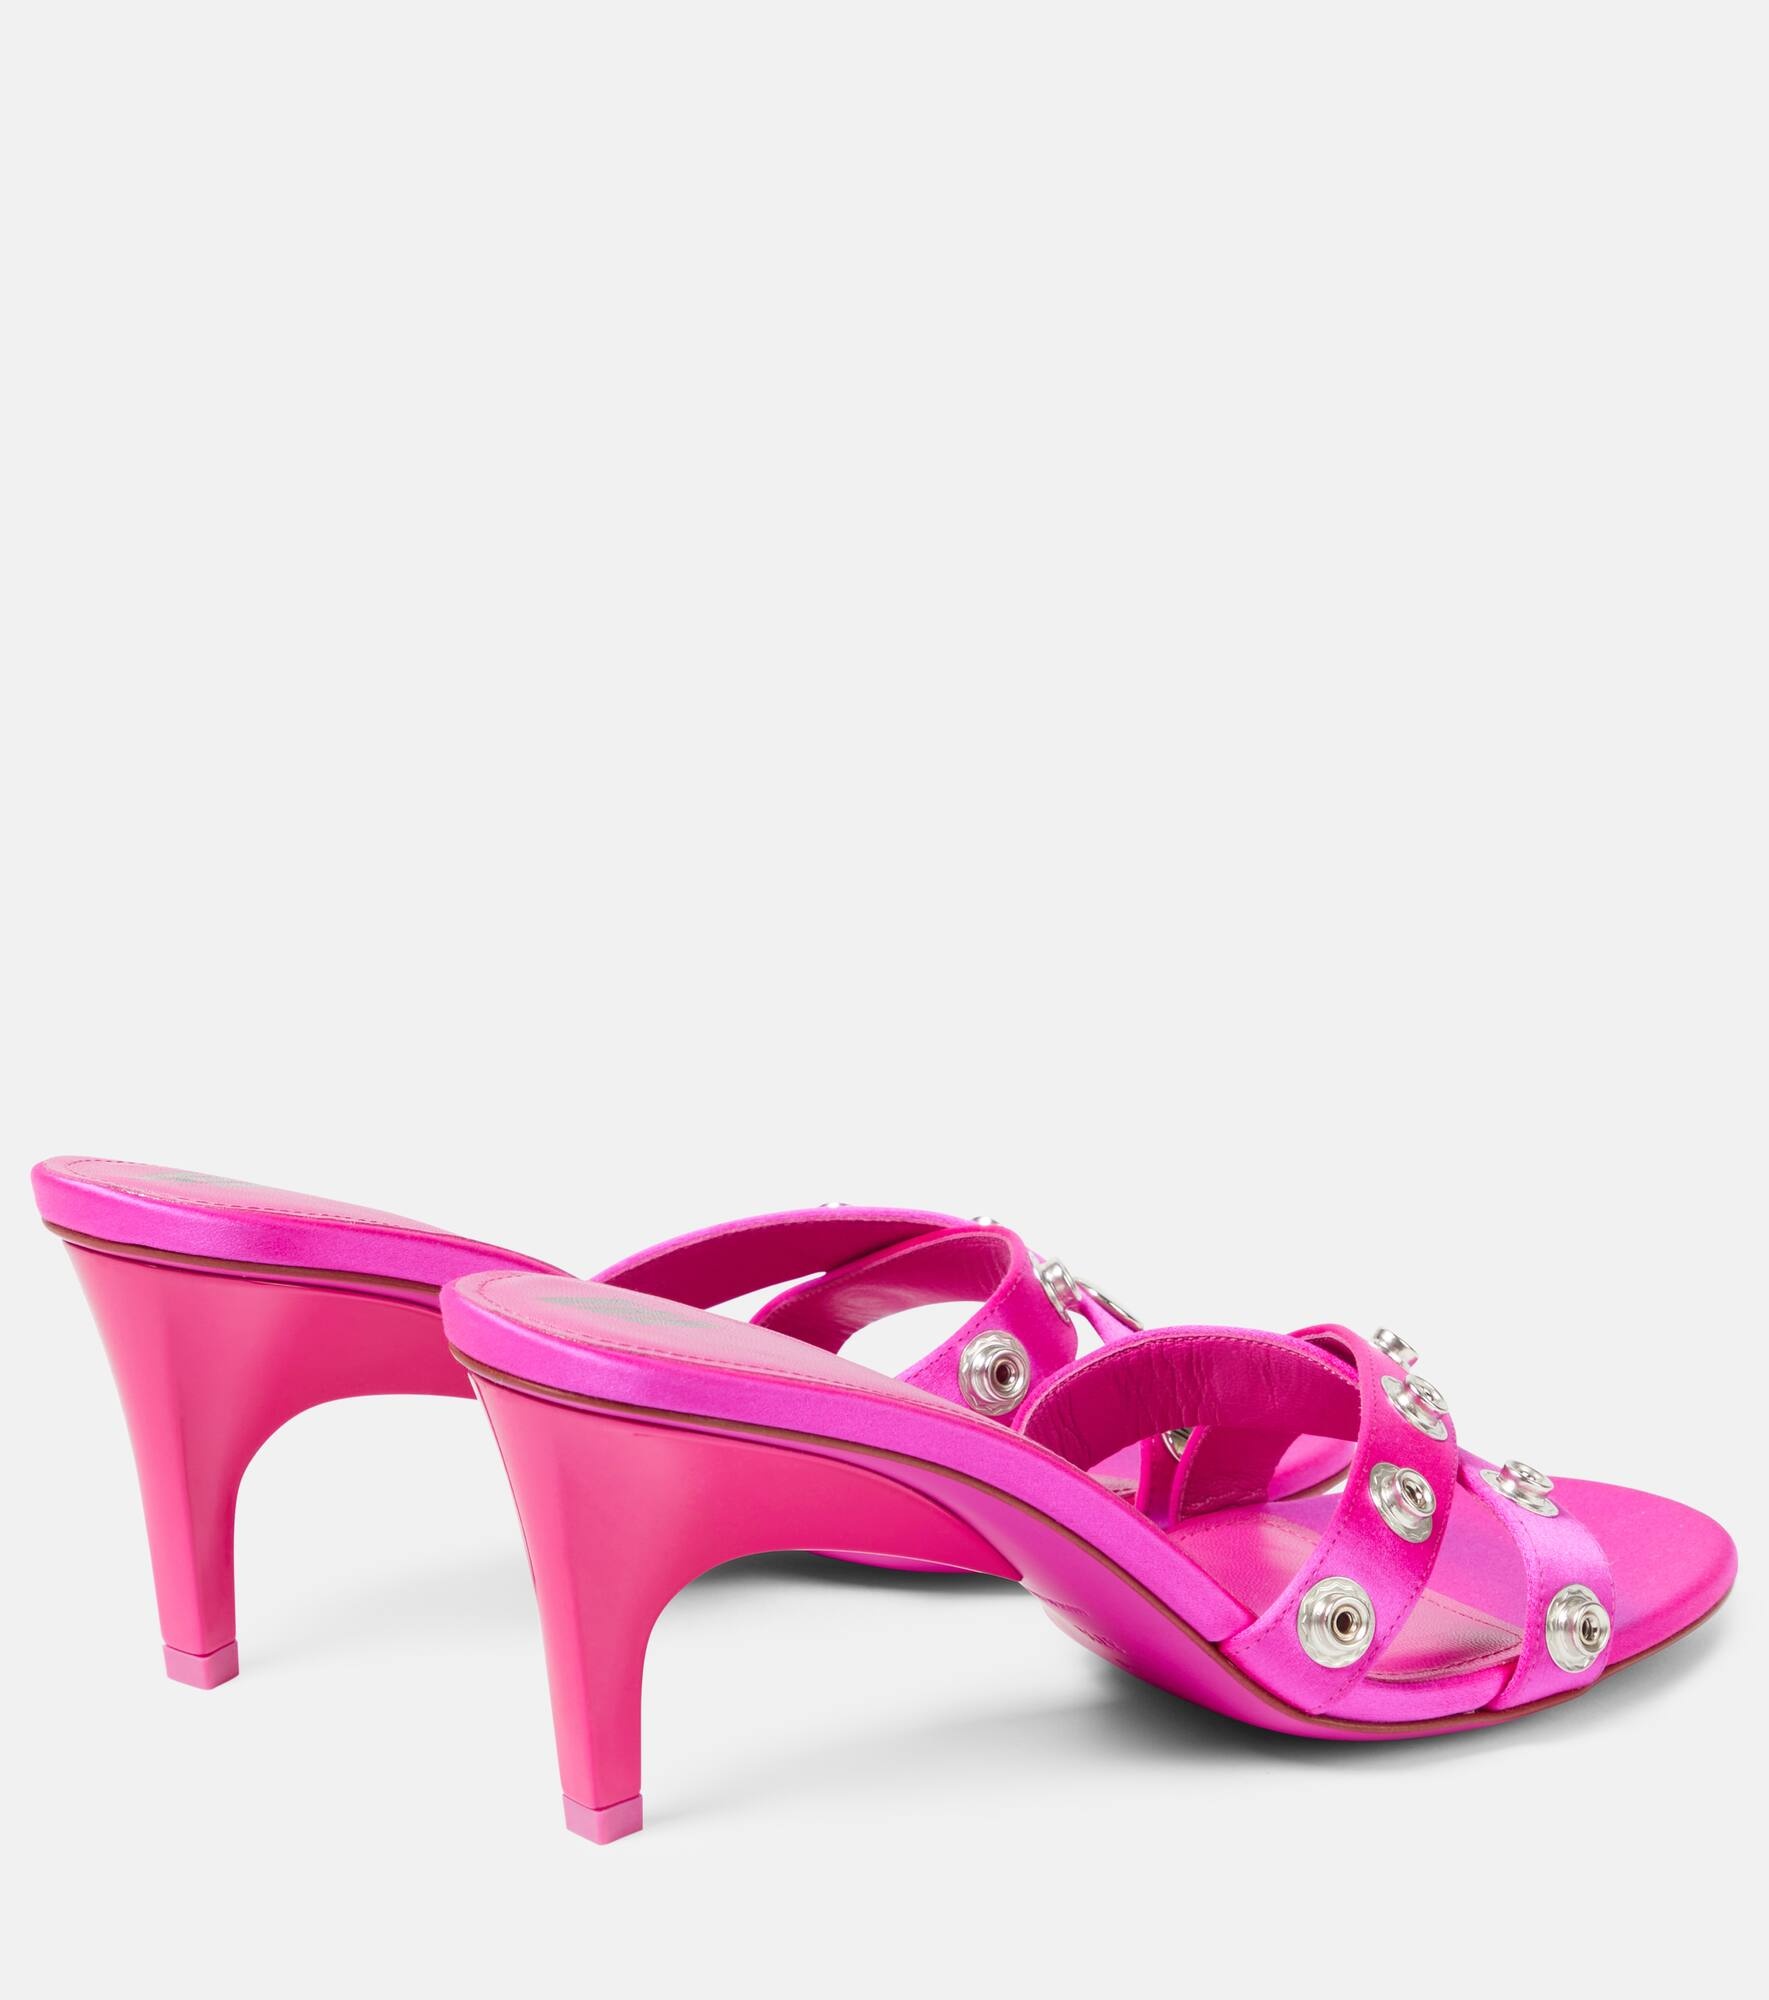 Cosmo 60 studded satin sandals - 3